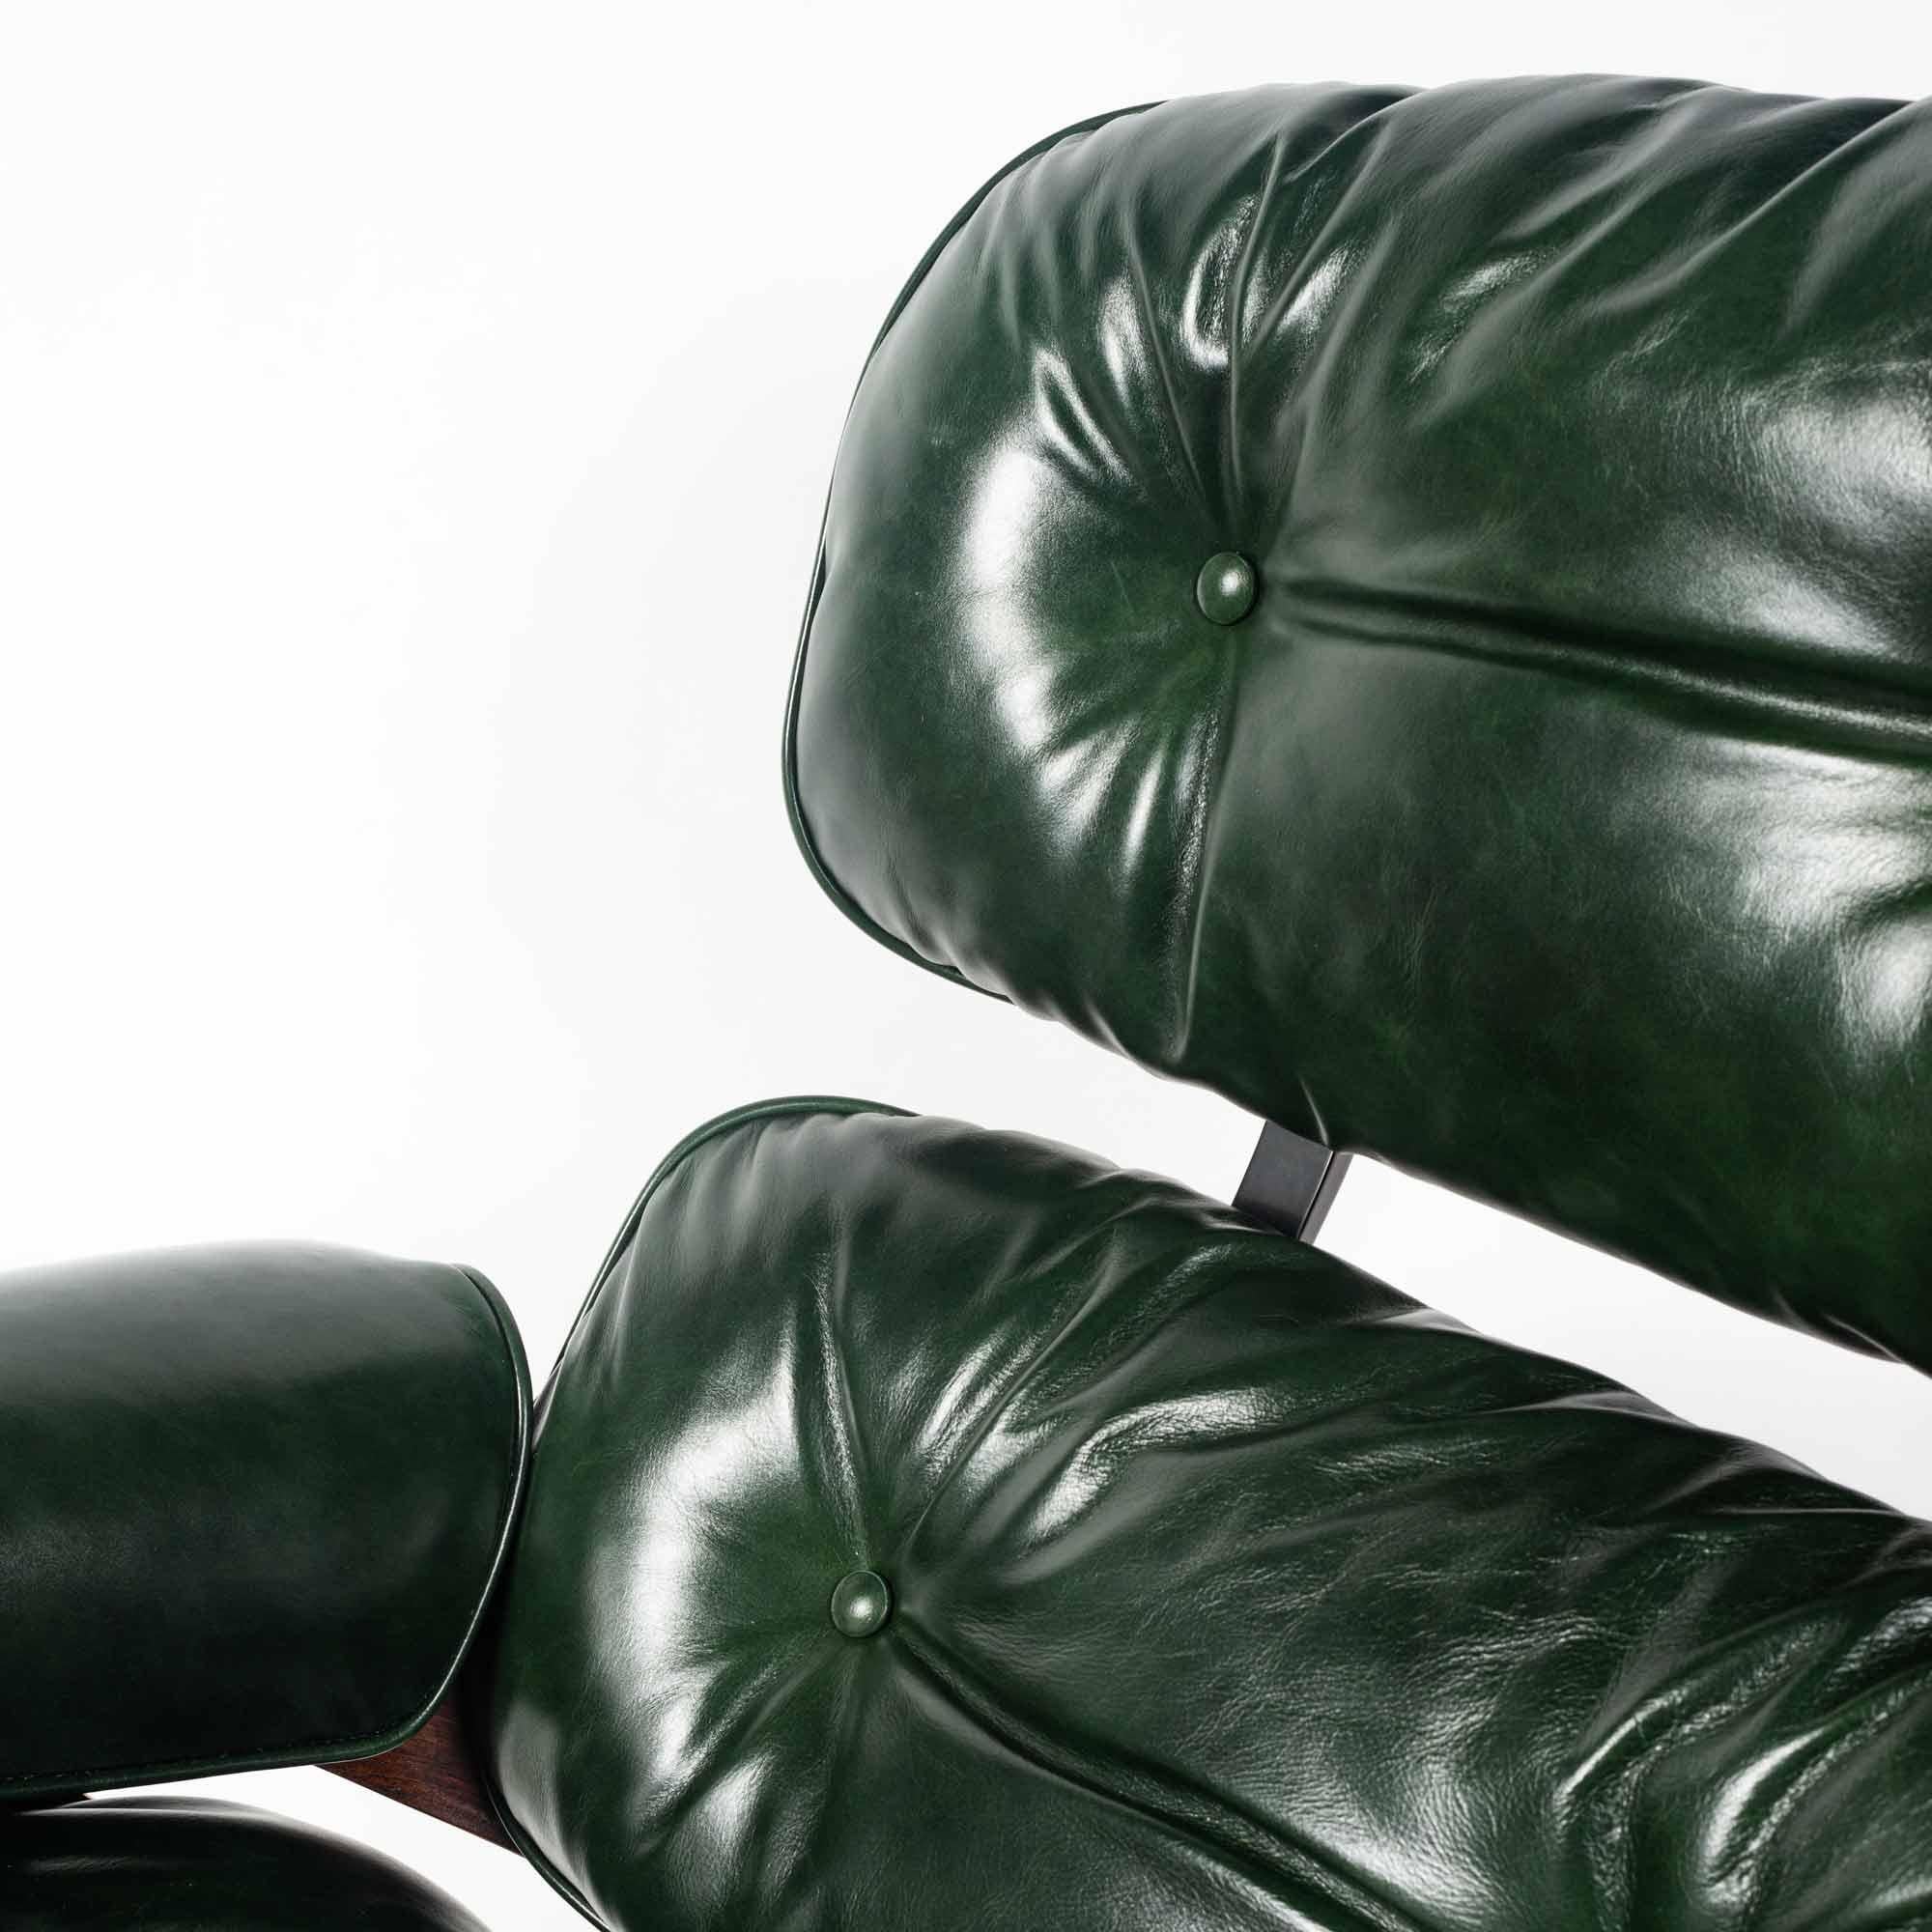 Late 20th Century Customed Order, 3rd Gen Eames Lounge Chair in British Racing Green Leather